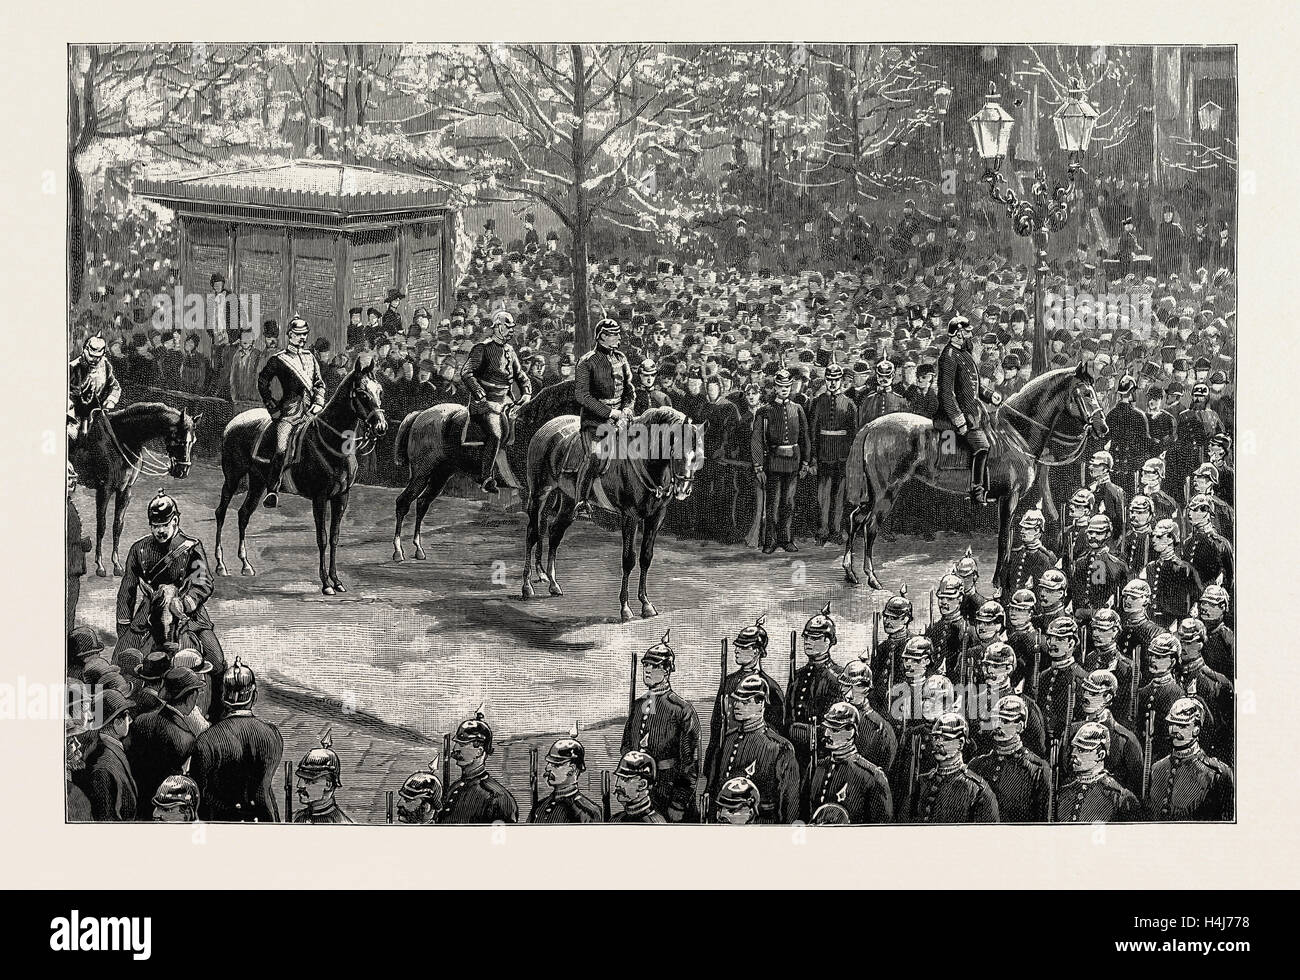 SCENES FROM THE EVERY DAY LIFE OF THE GERMAN EMPEROR, 1889: THE SECOND FOOT GUARDS, AFTER A PARADE, MARCHING PAST THE EMPEROR Stock Photo